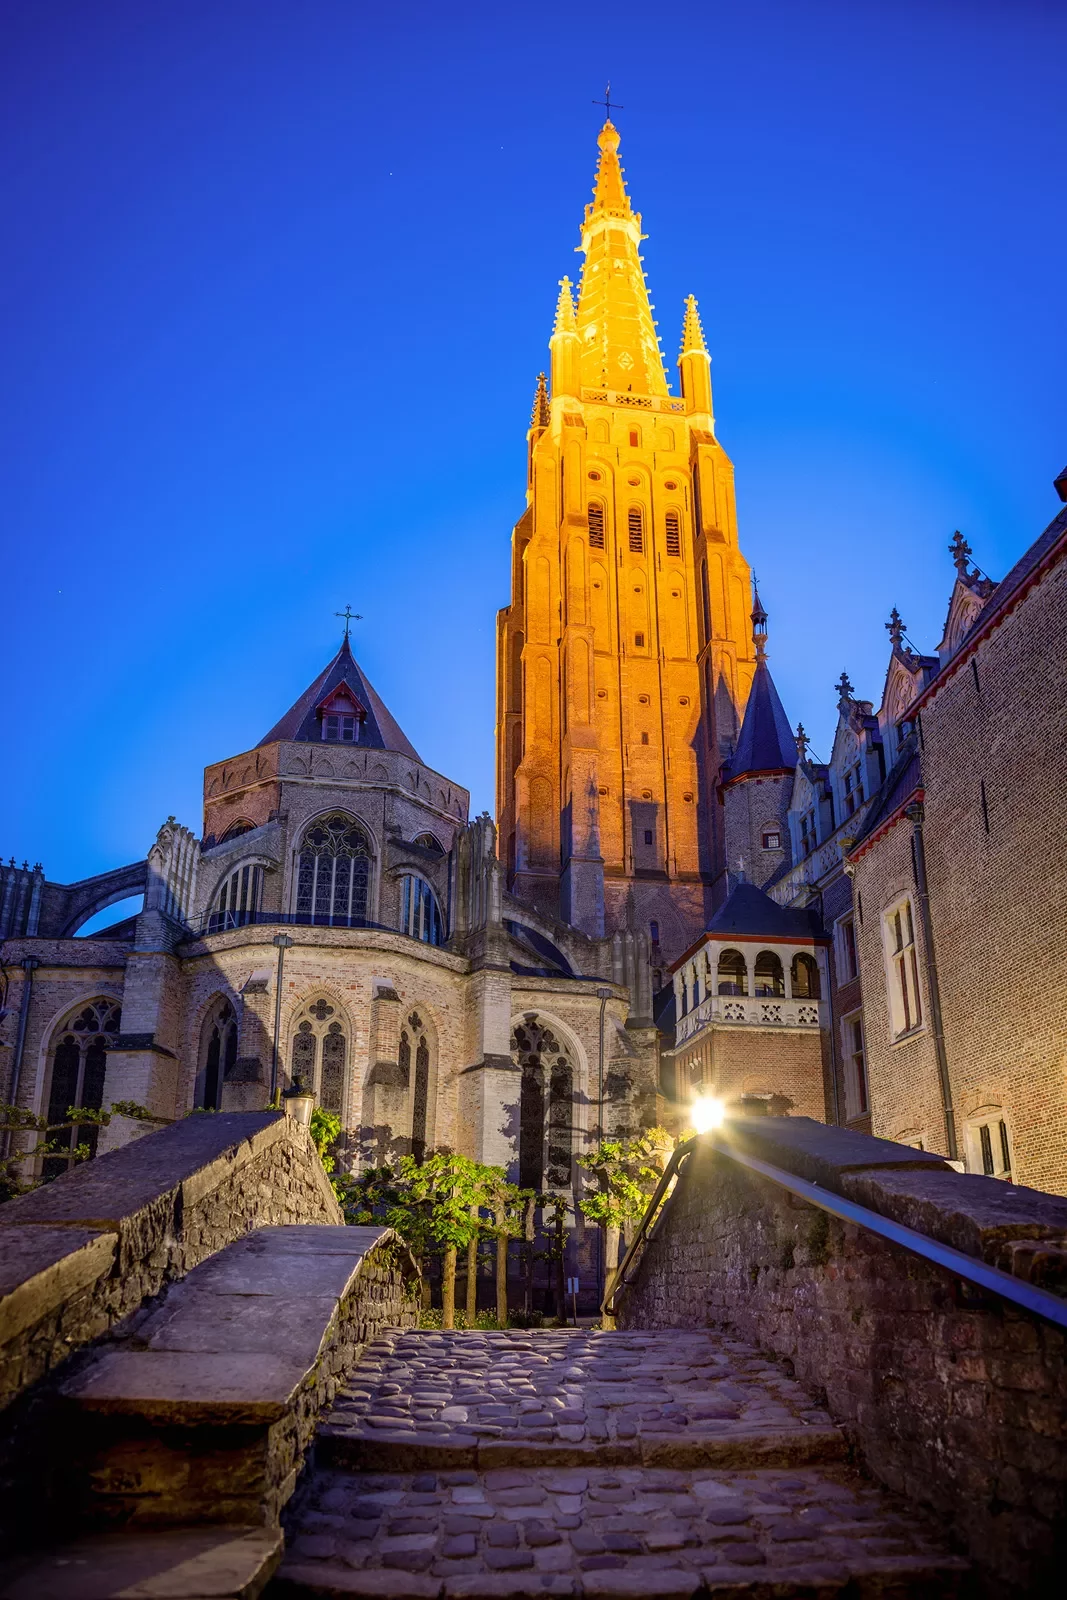 Nighttime shot of the Church of Our Lady in Bruges.